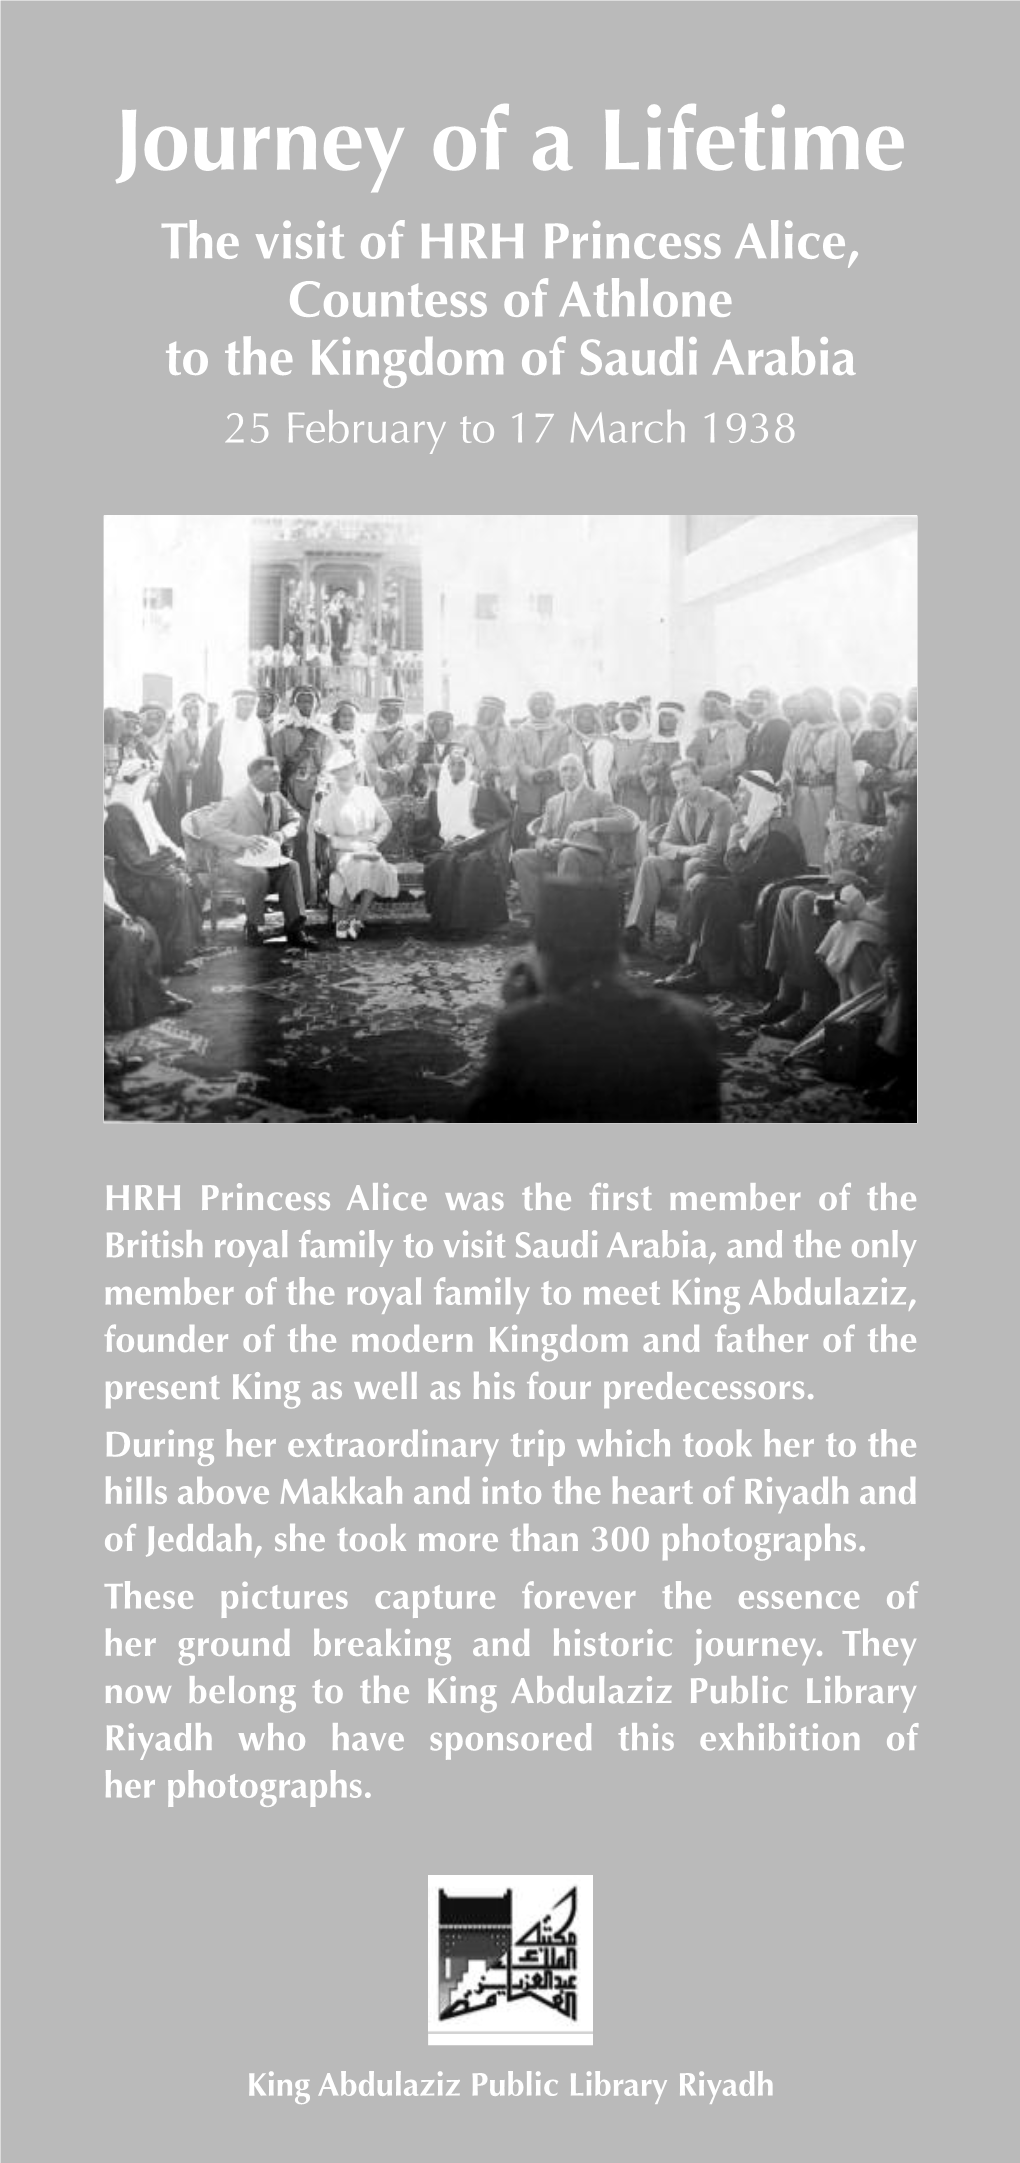 Journey of a Lifetime the Visit of HRH Princess Alice, Countess of Athlone to the Kingdom of Saudi Arabia 25 February to 17 March 1938